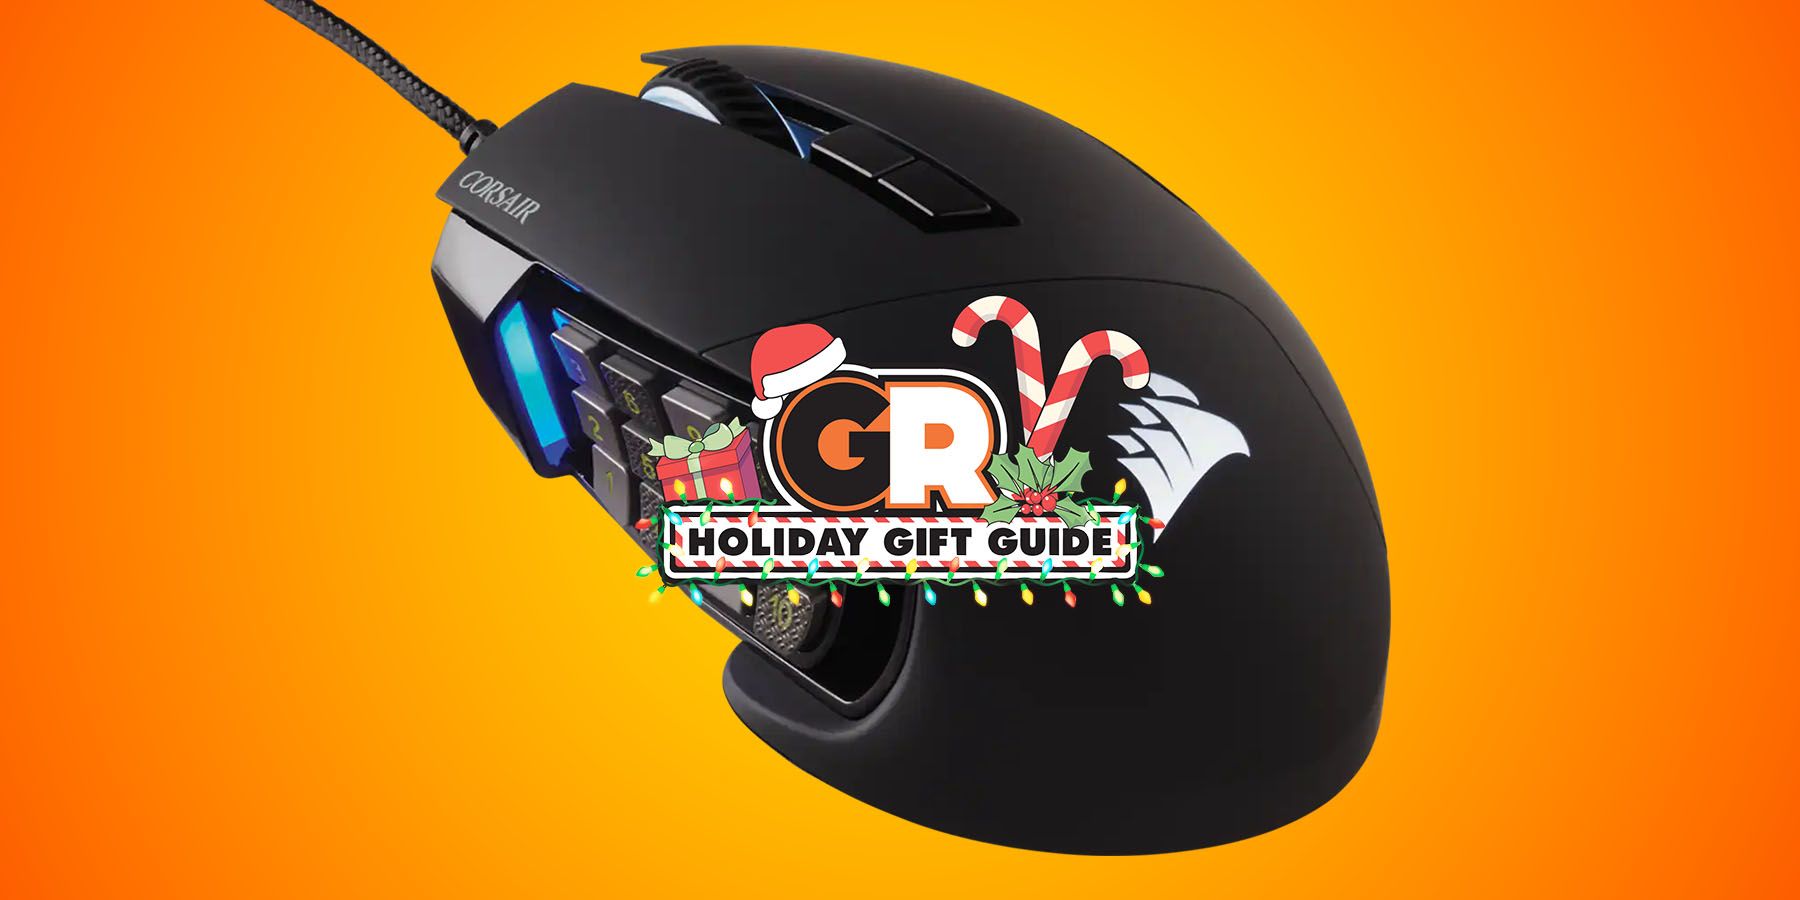 amazon holiday gift guide discount december